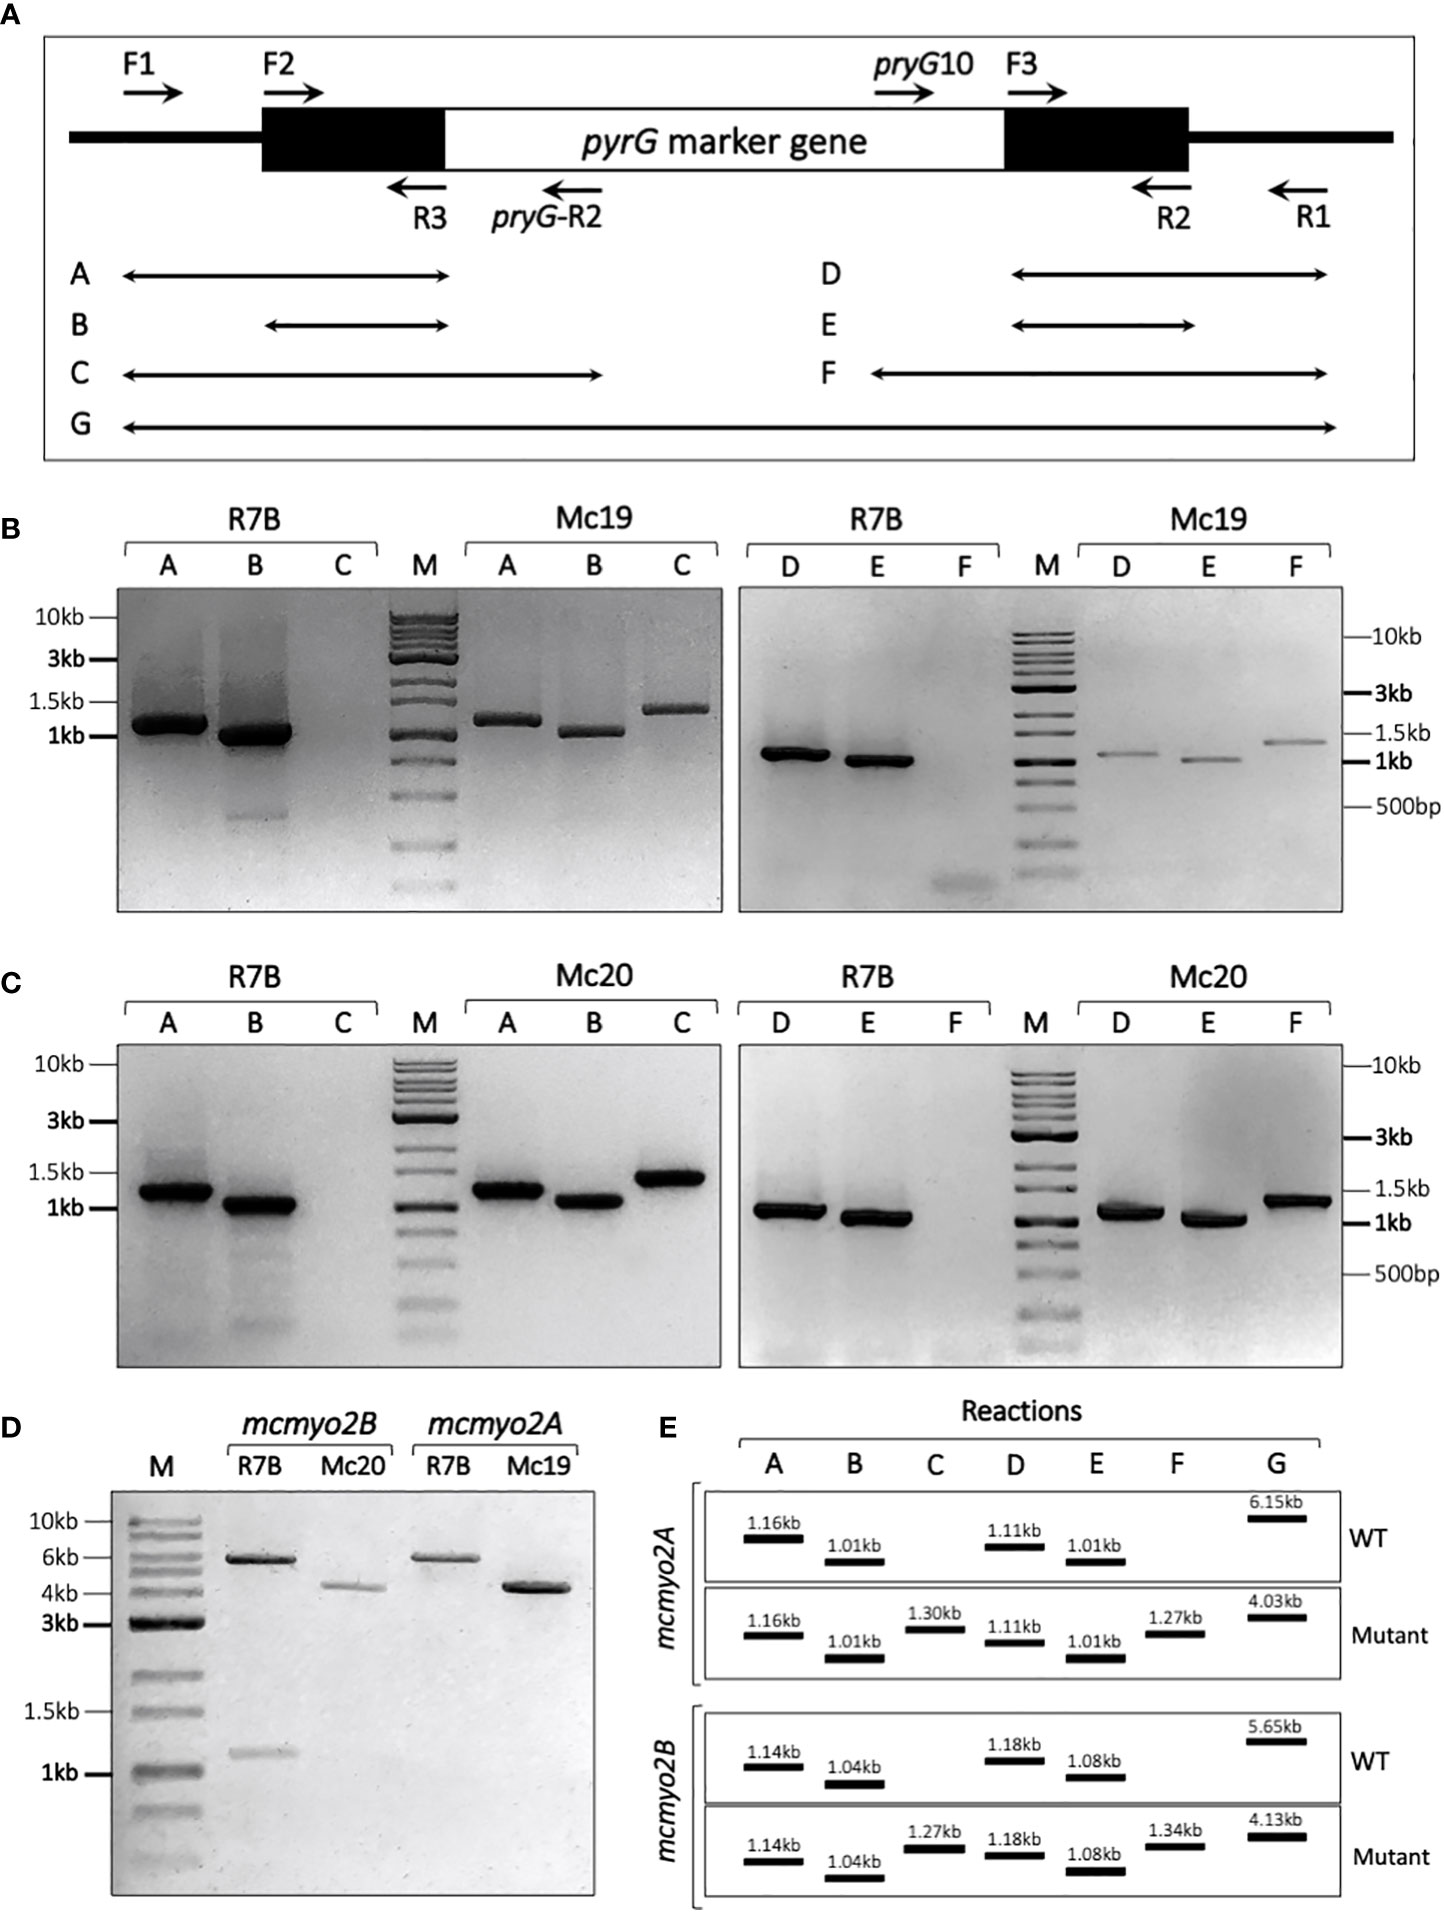 Frontiers Myosin-II proteins are involved in the growth, morphogenesis, and virulence of the human pathogenic fungus Mucor circinelloides